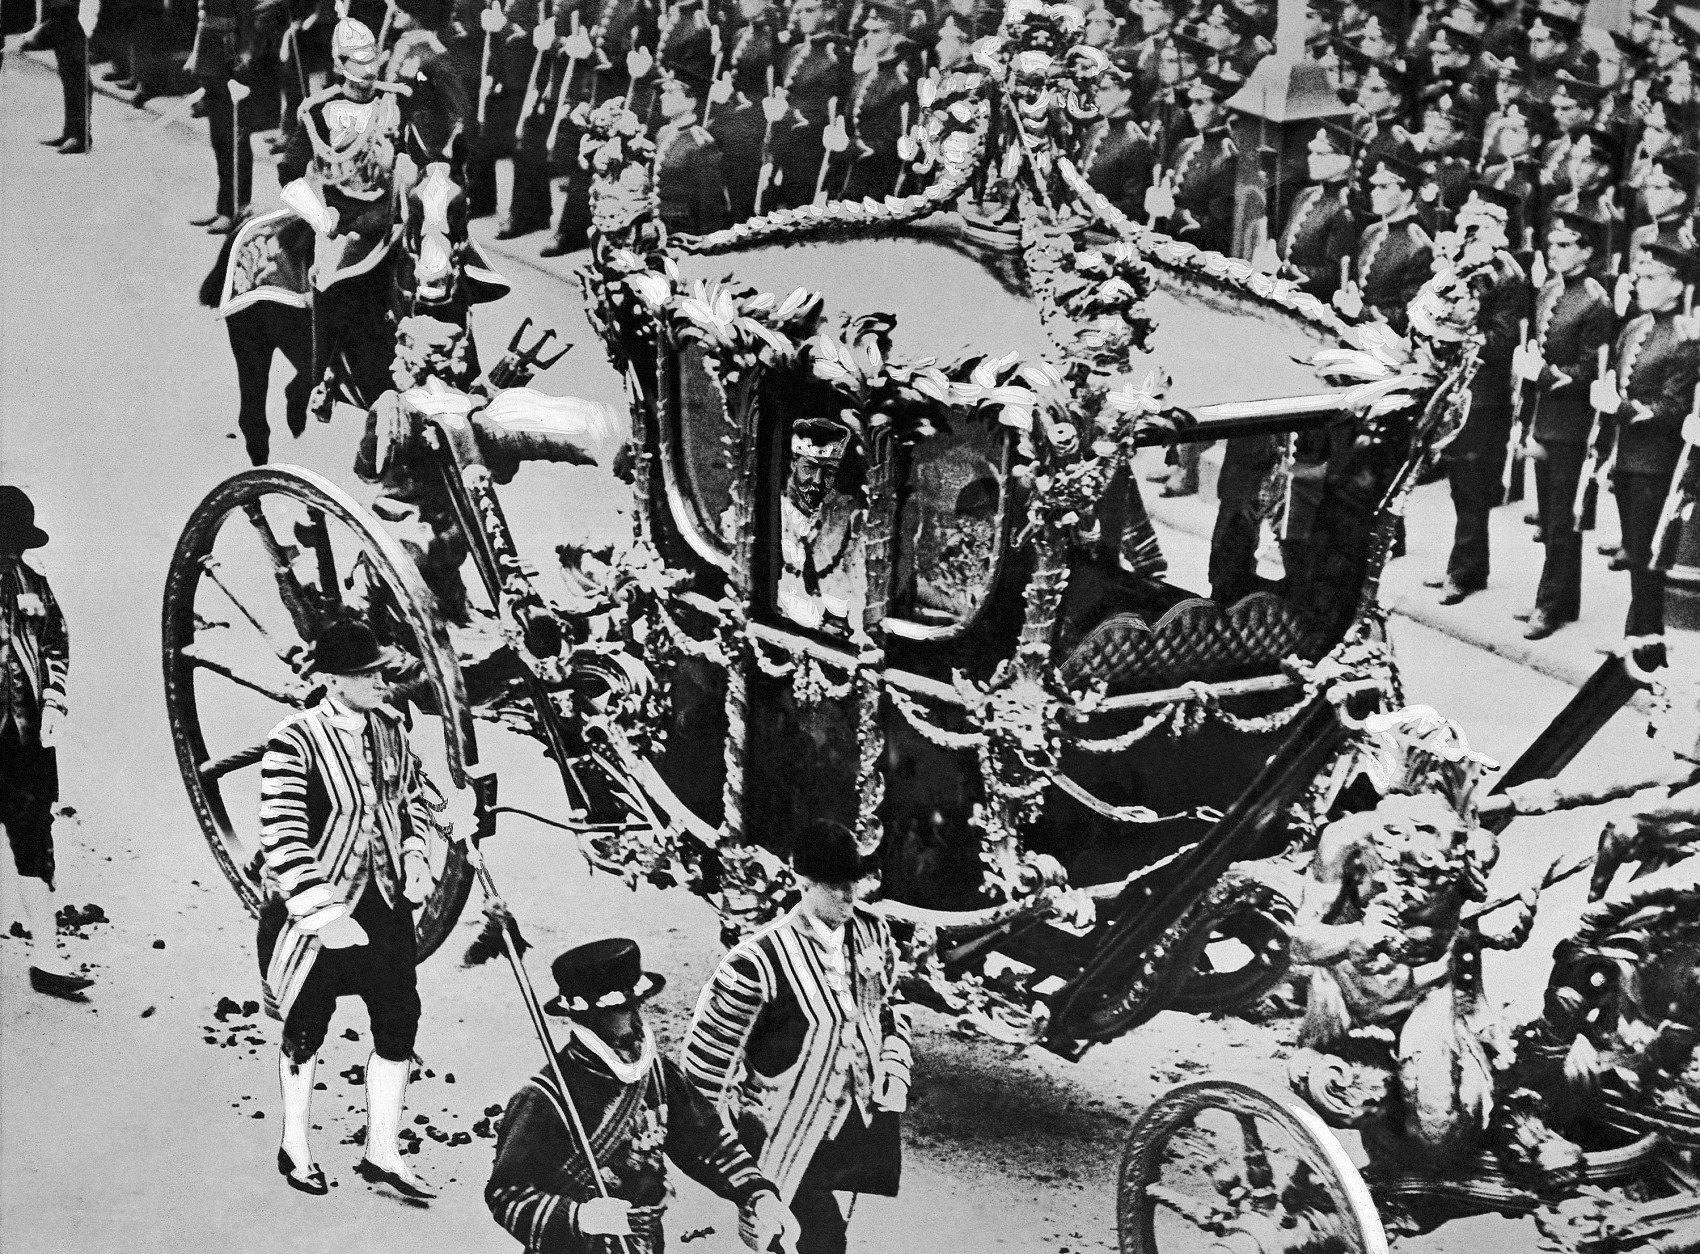 King George V of England and Queen Mary in state coach on their arrival at Westminster Abbey during the coronation on June 22, 1911. (AP Photo)